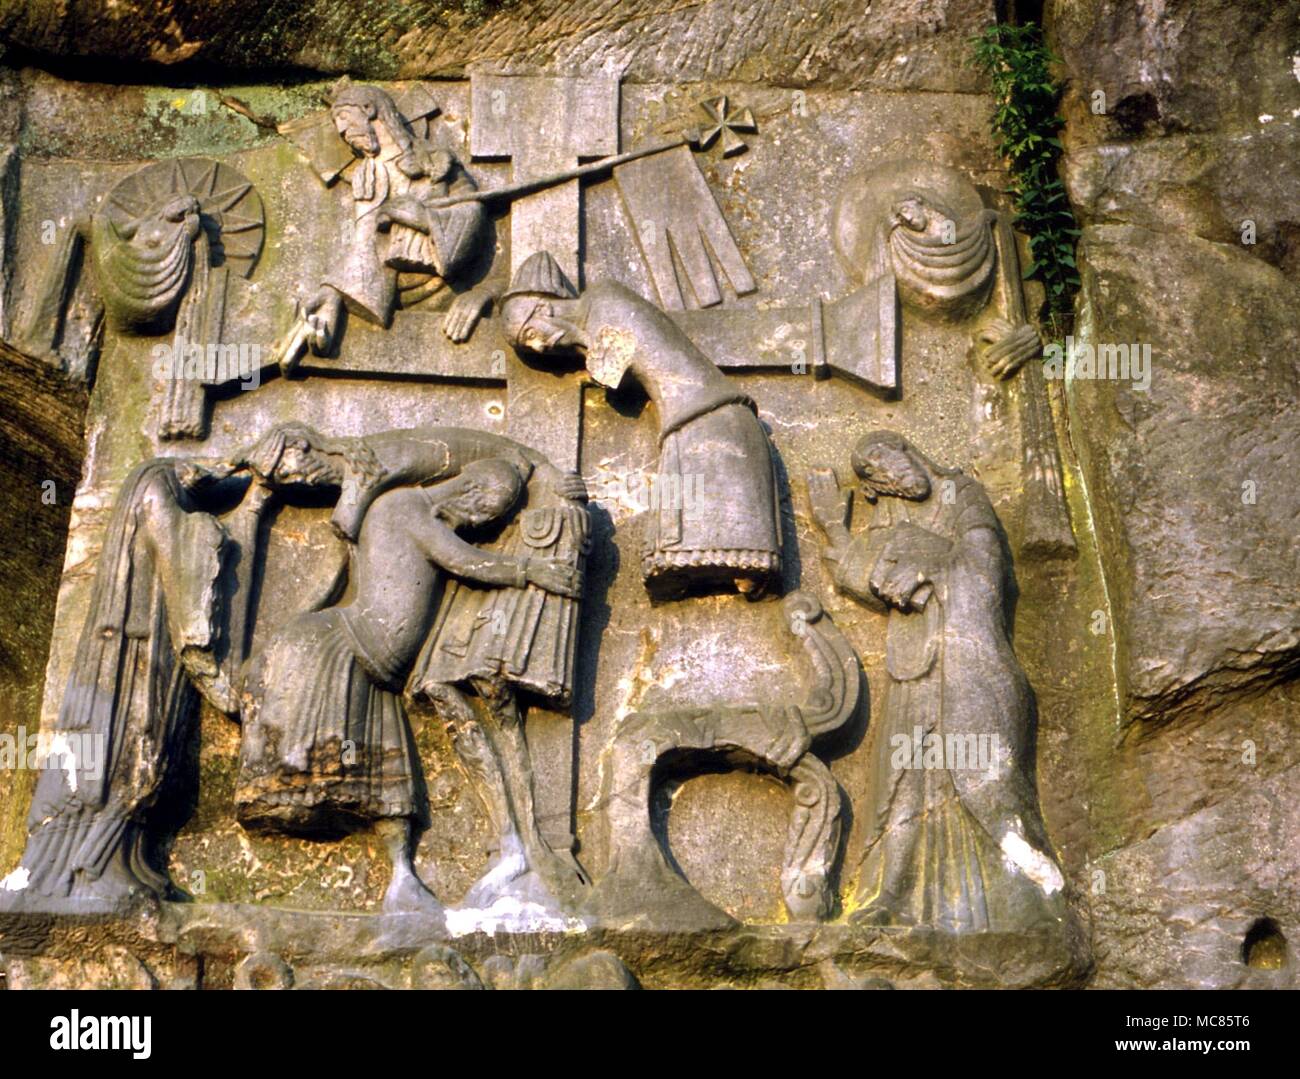 Christian The deep relief showing the Descent from the Cross, with the Irmensul. From the mediaeval carving on the living rock of the Externsteine stones, near Detmold Stock Photo